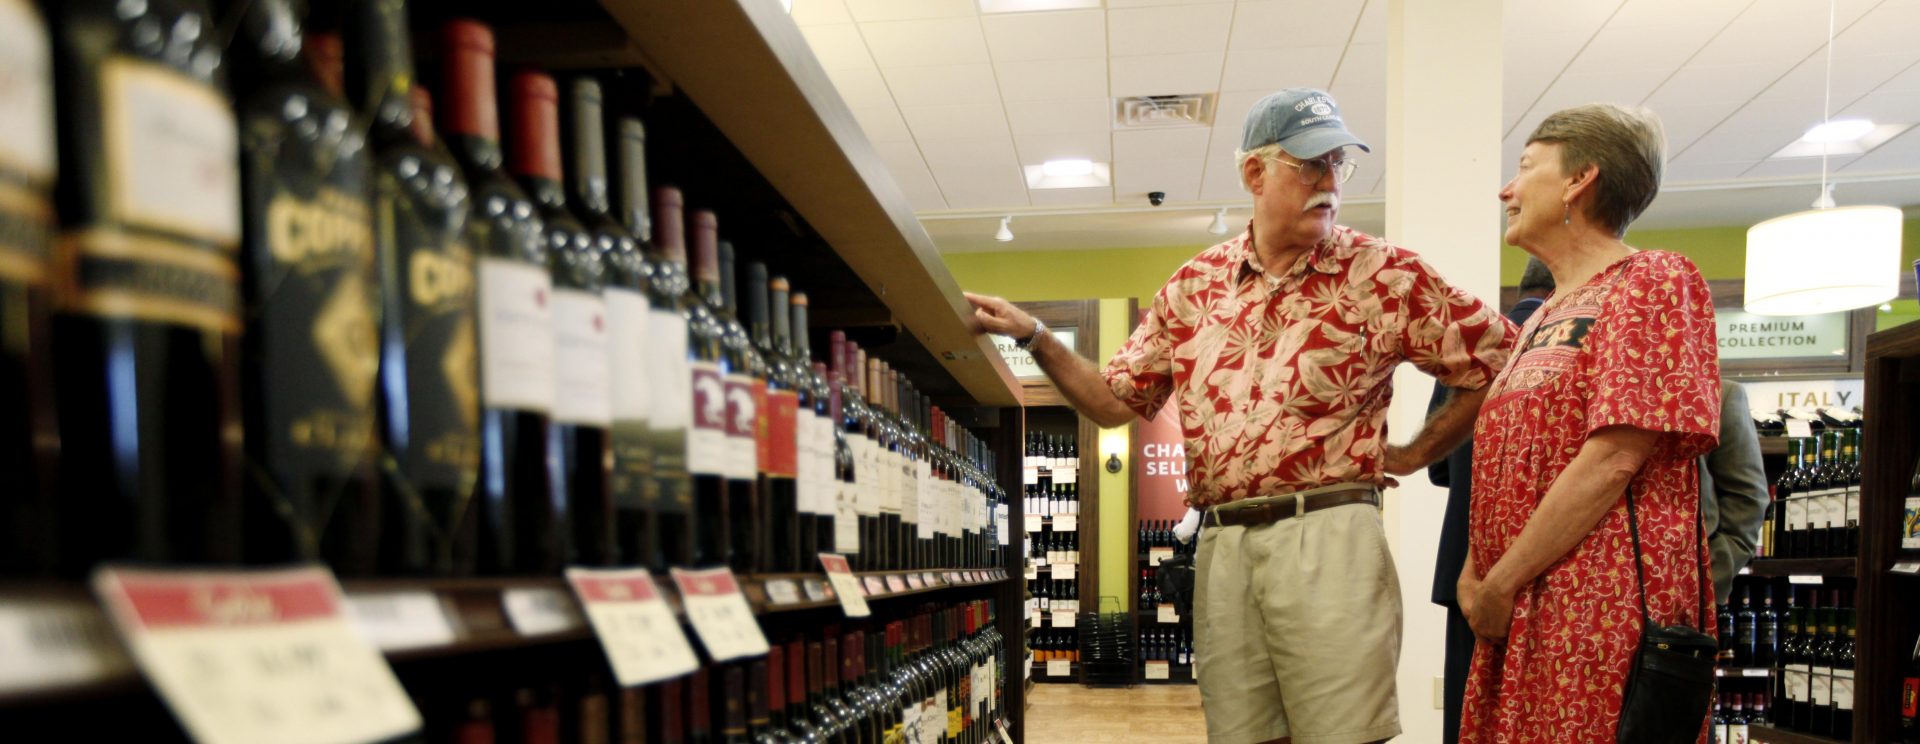 In this Thursday, July 22, 2010 photo, Hugh and Karen Hoffman of Wycombe, Pa. shop at a state wine and liquor store in New Hope, Pa.